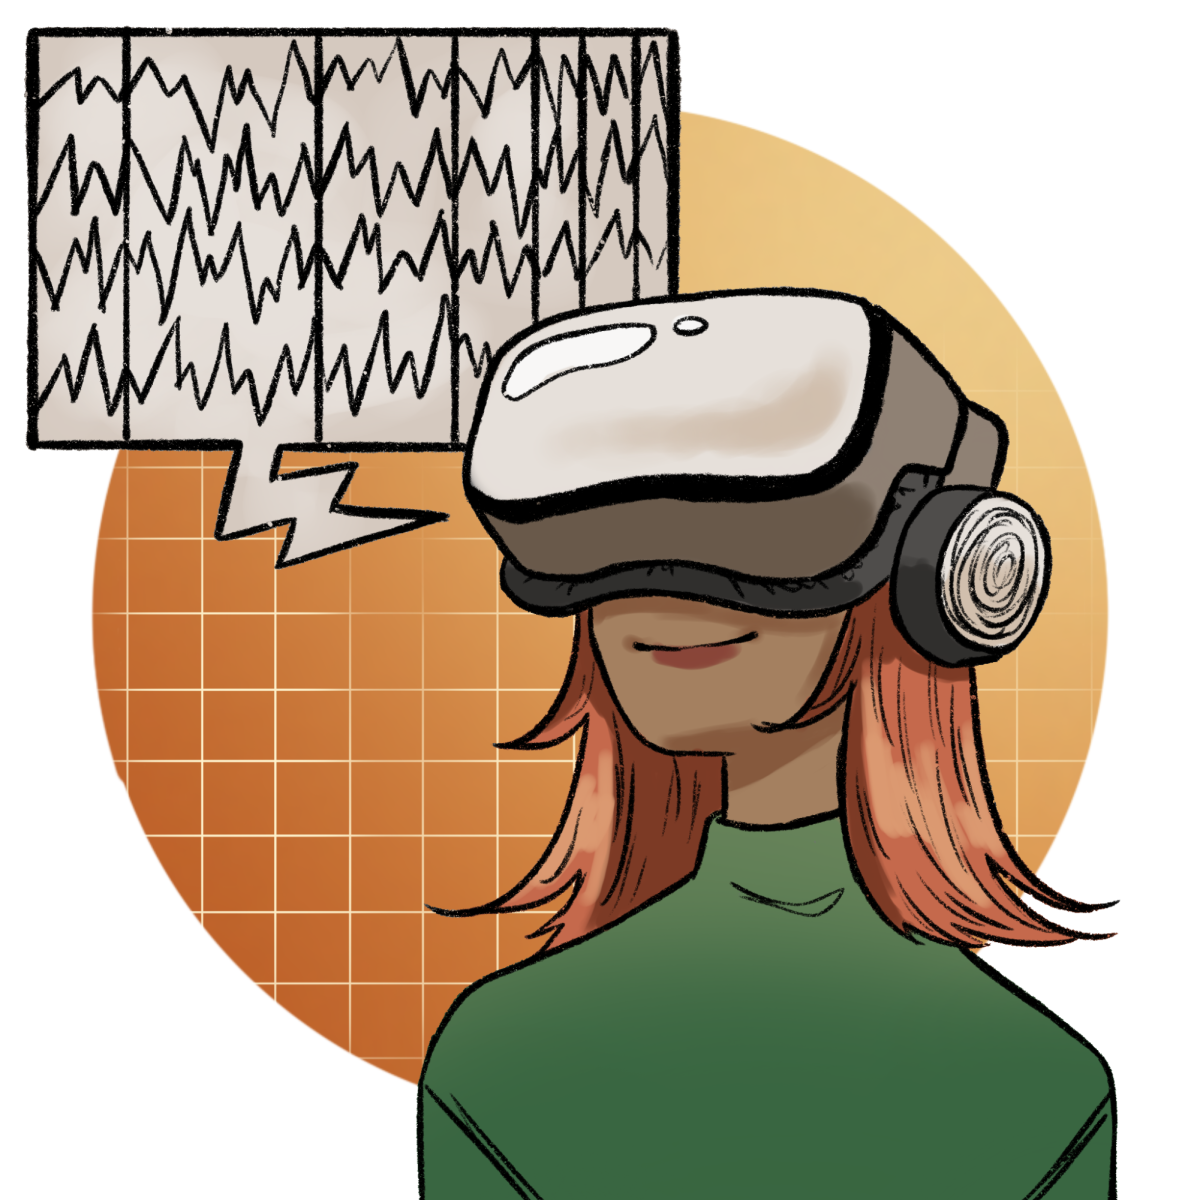 UT+researchers+develop+modified+VR+headset+to+monitor+brain+activity